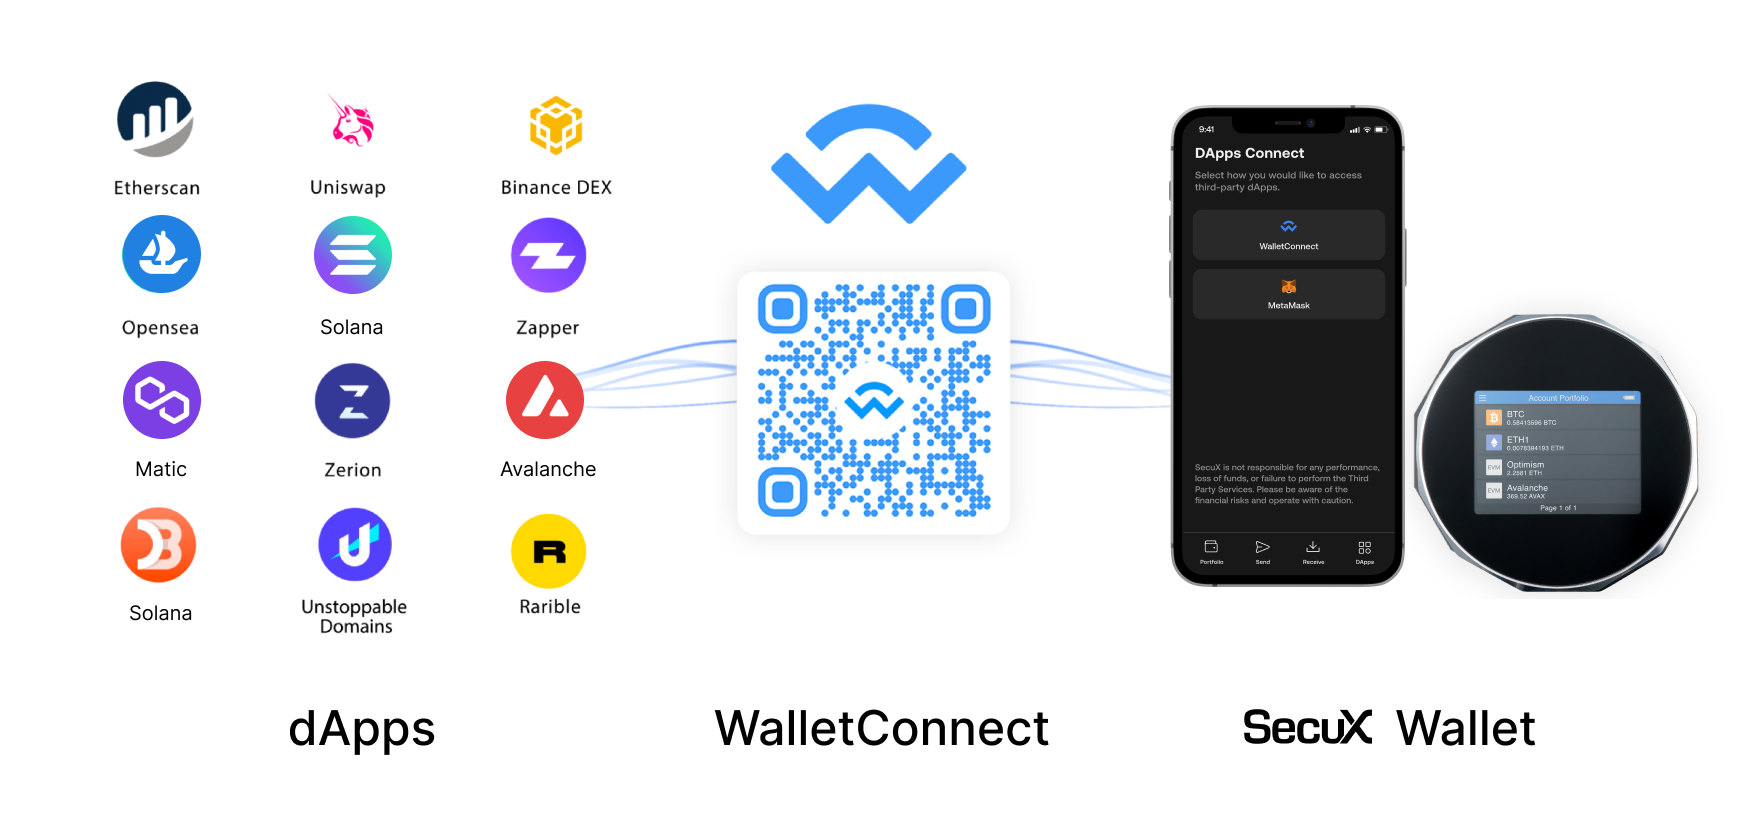 What is WalletConnect